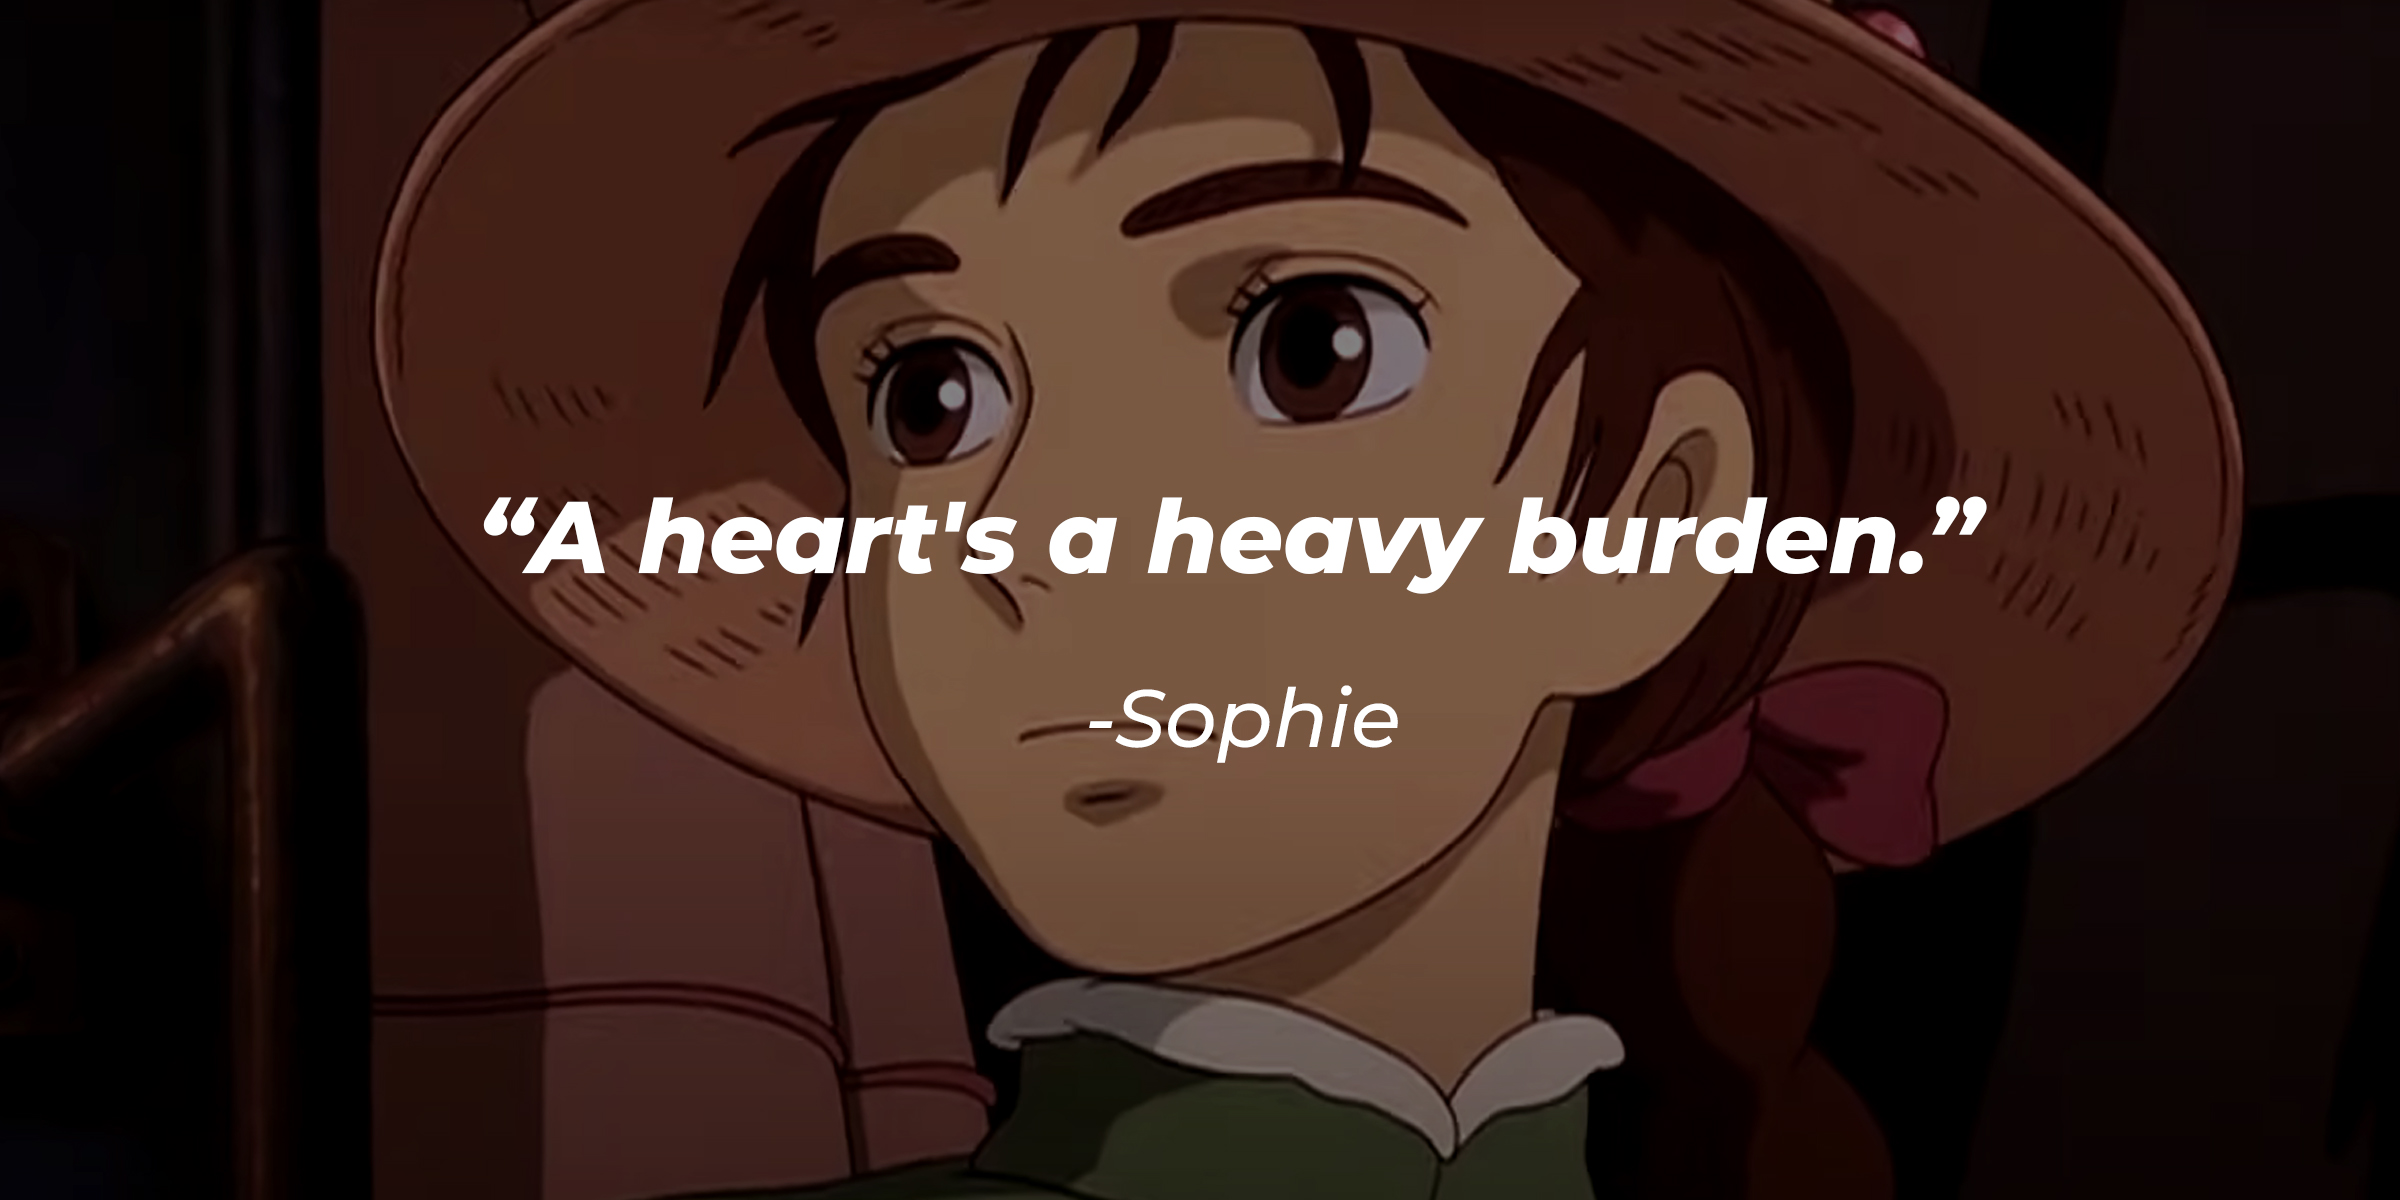 Sophie, with her quote: "A heart's a heavy burden." | Source: youtube.com/netflixanime